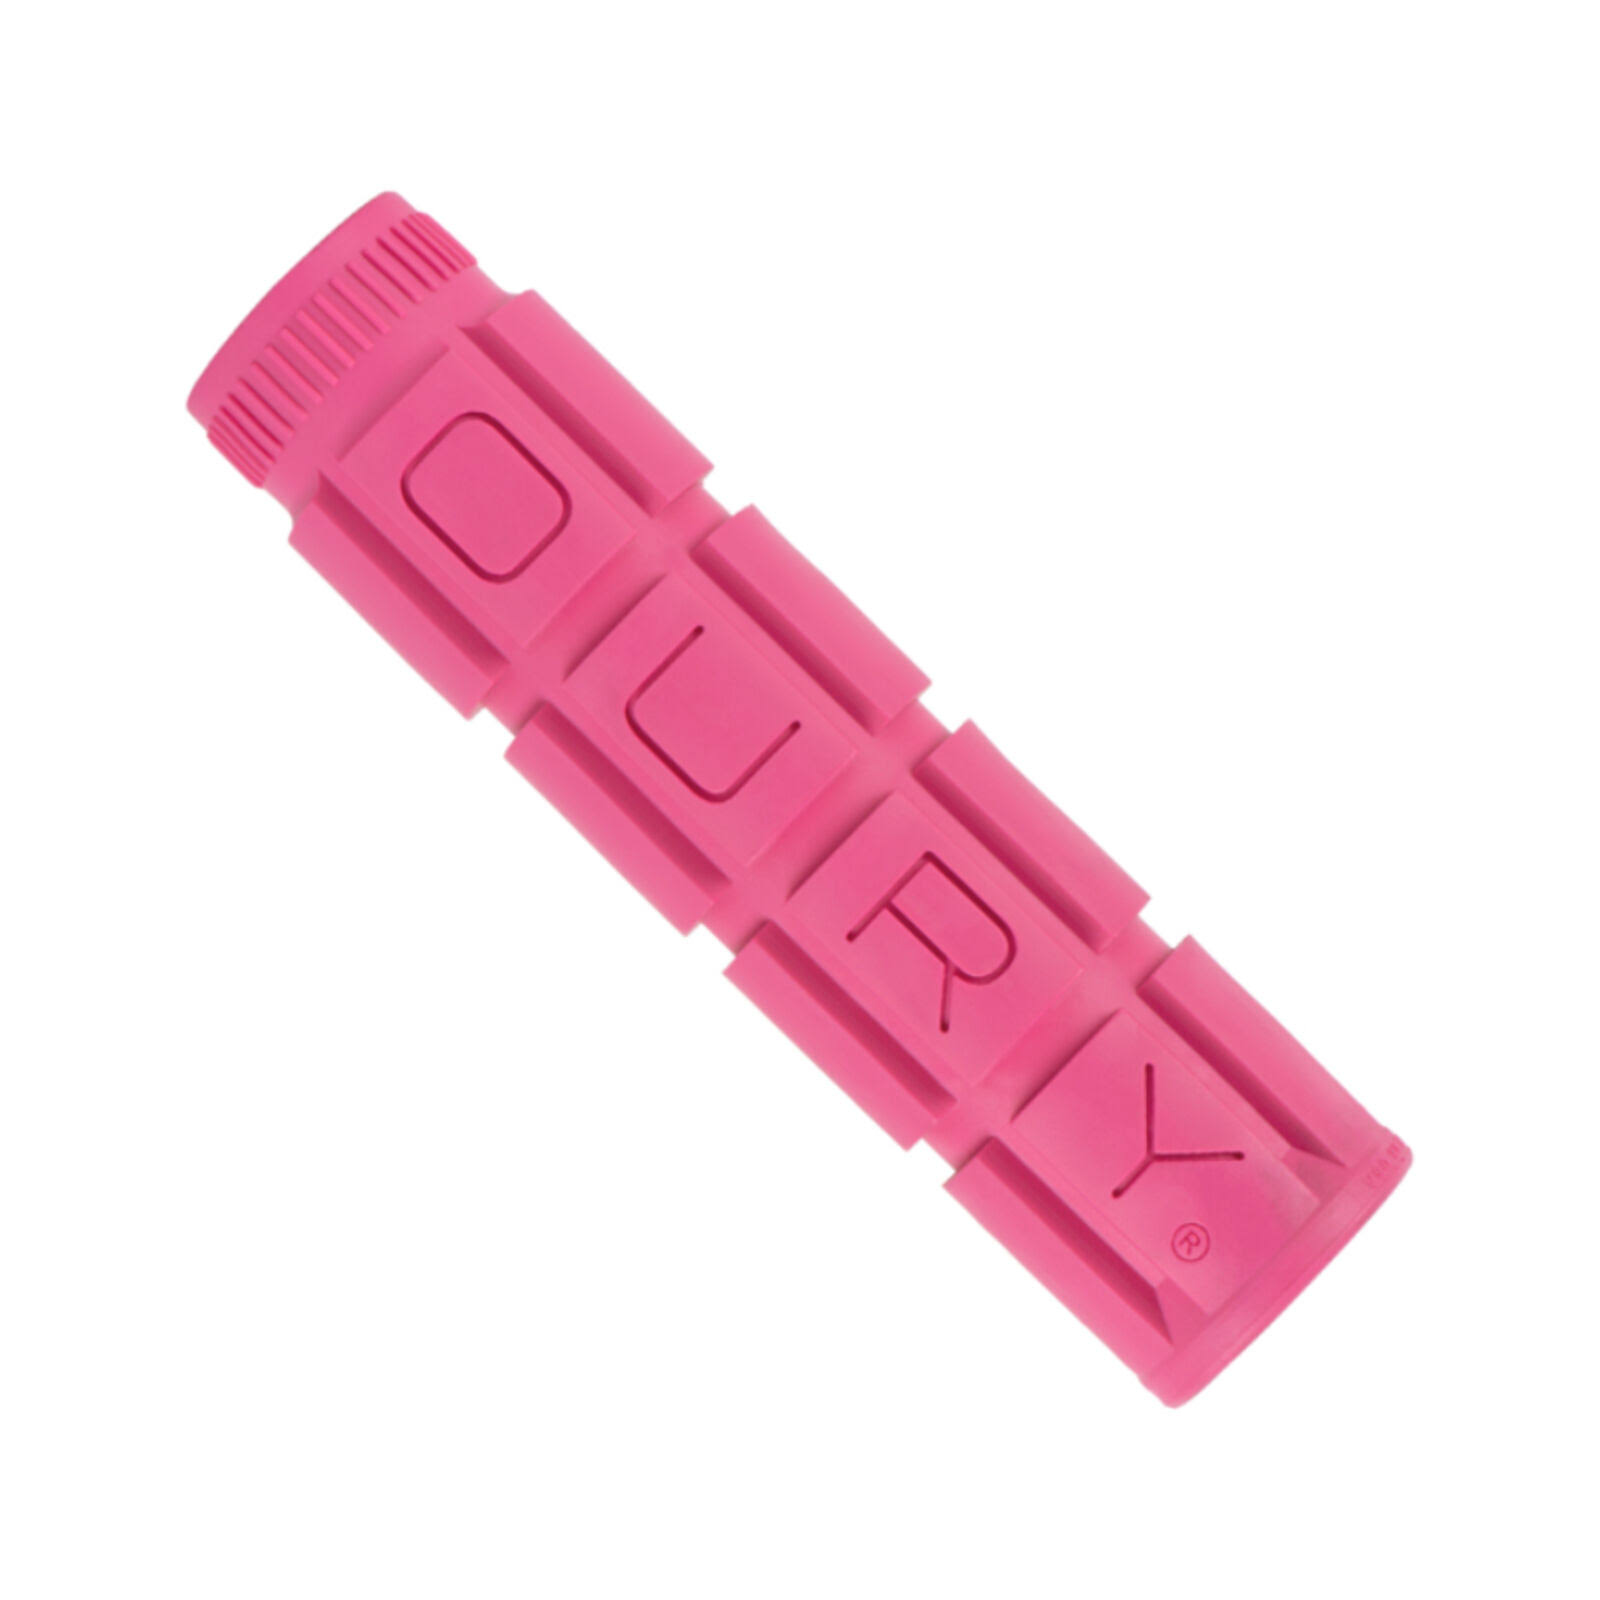 Lizard Skins Single Compound Oury V2 Grips, Pink